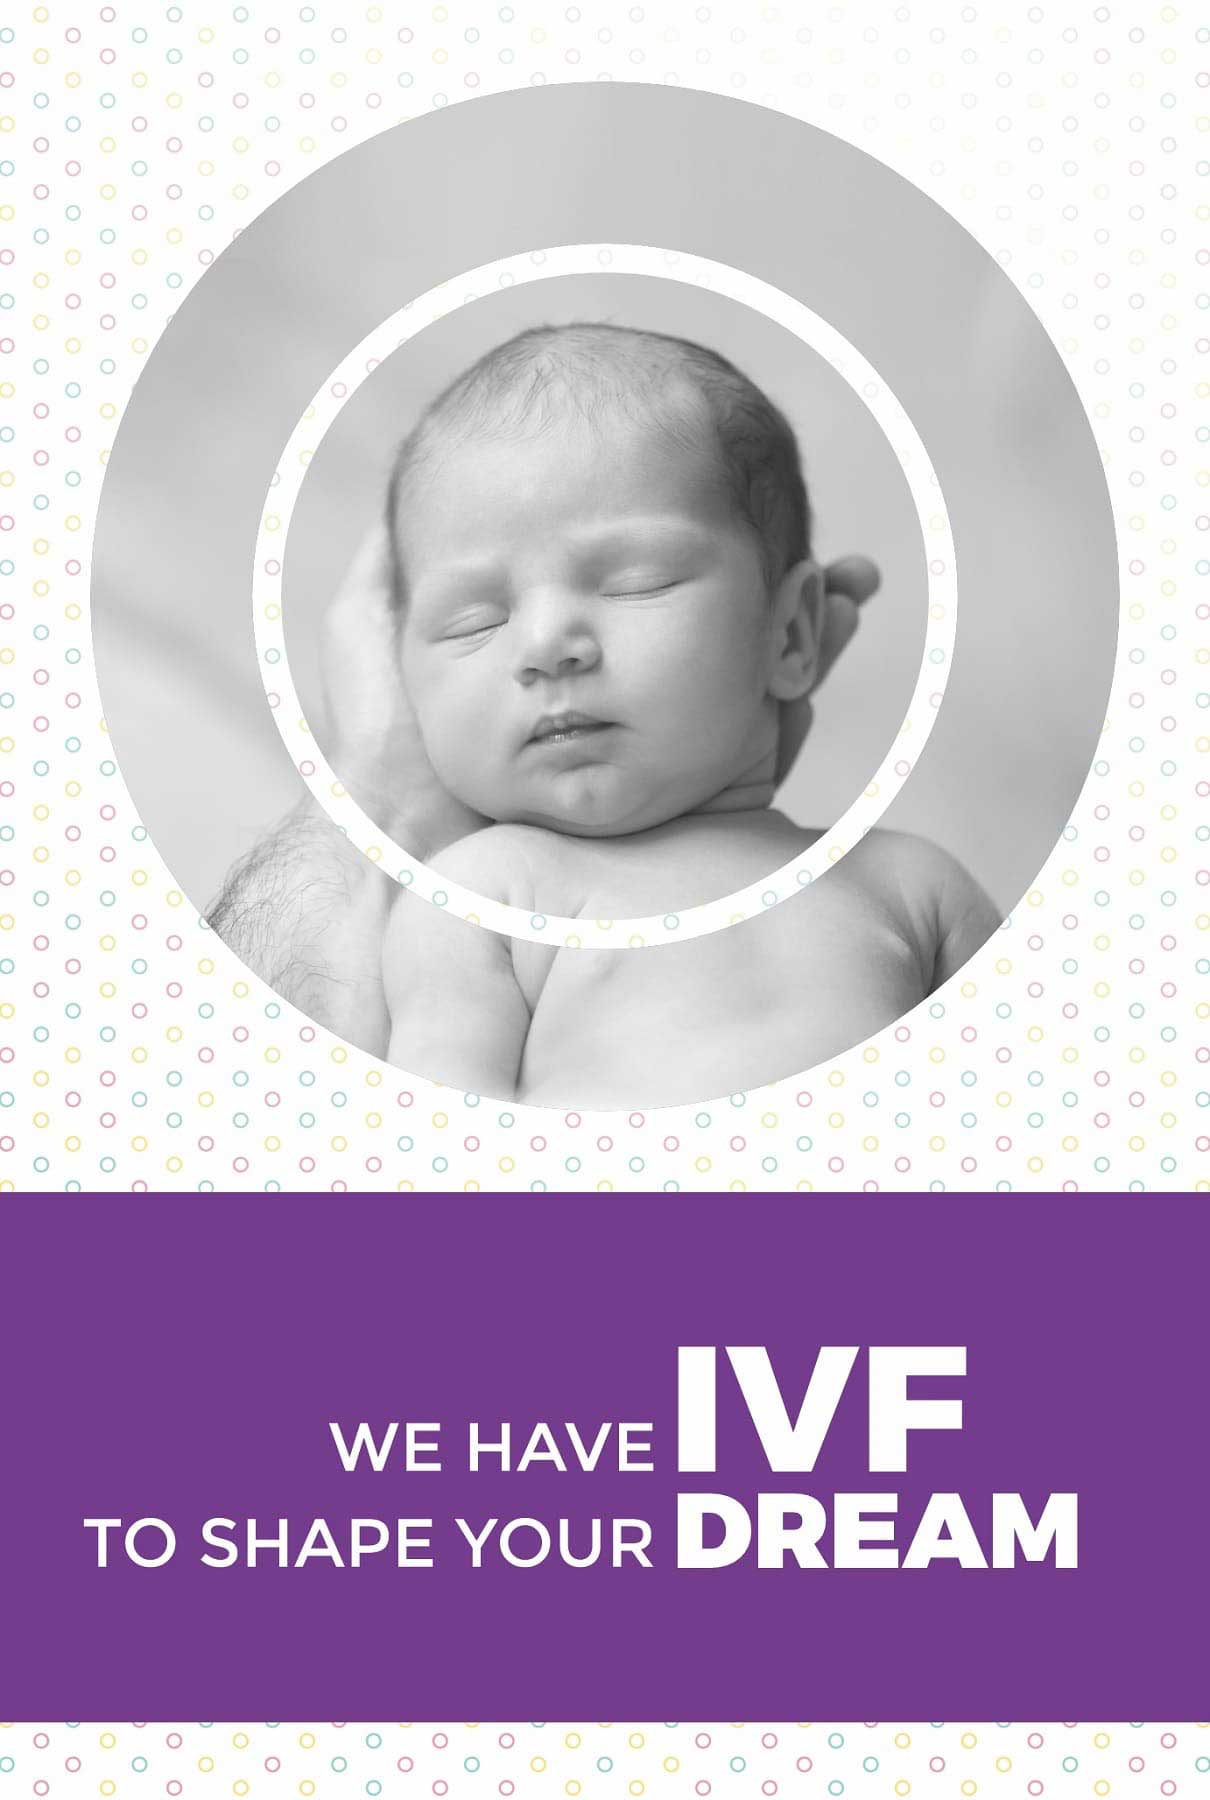 Milann has IVF to shape your dream of parenthood.